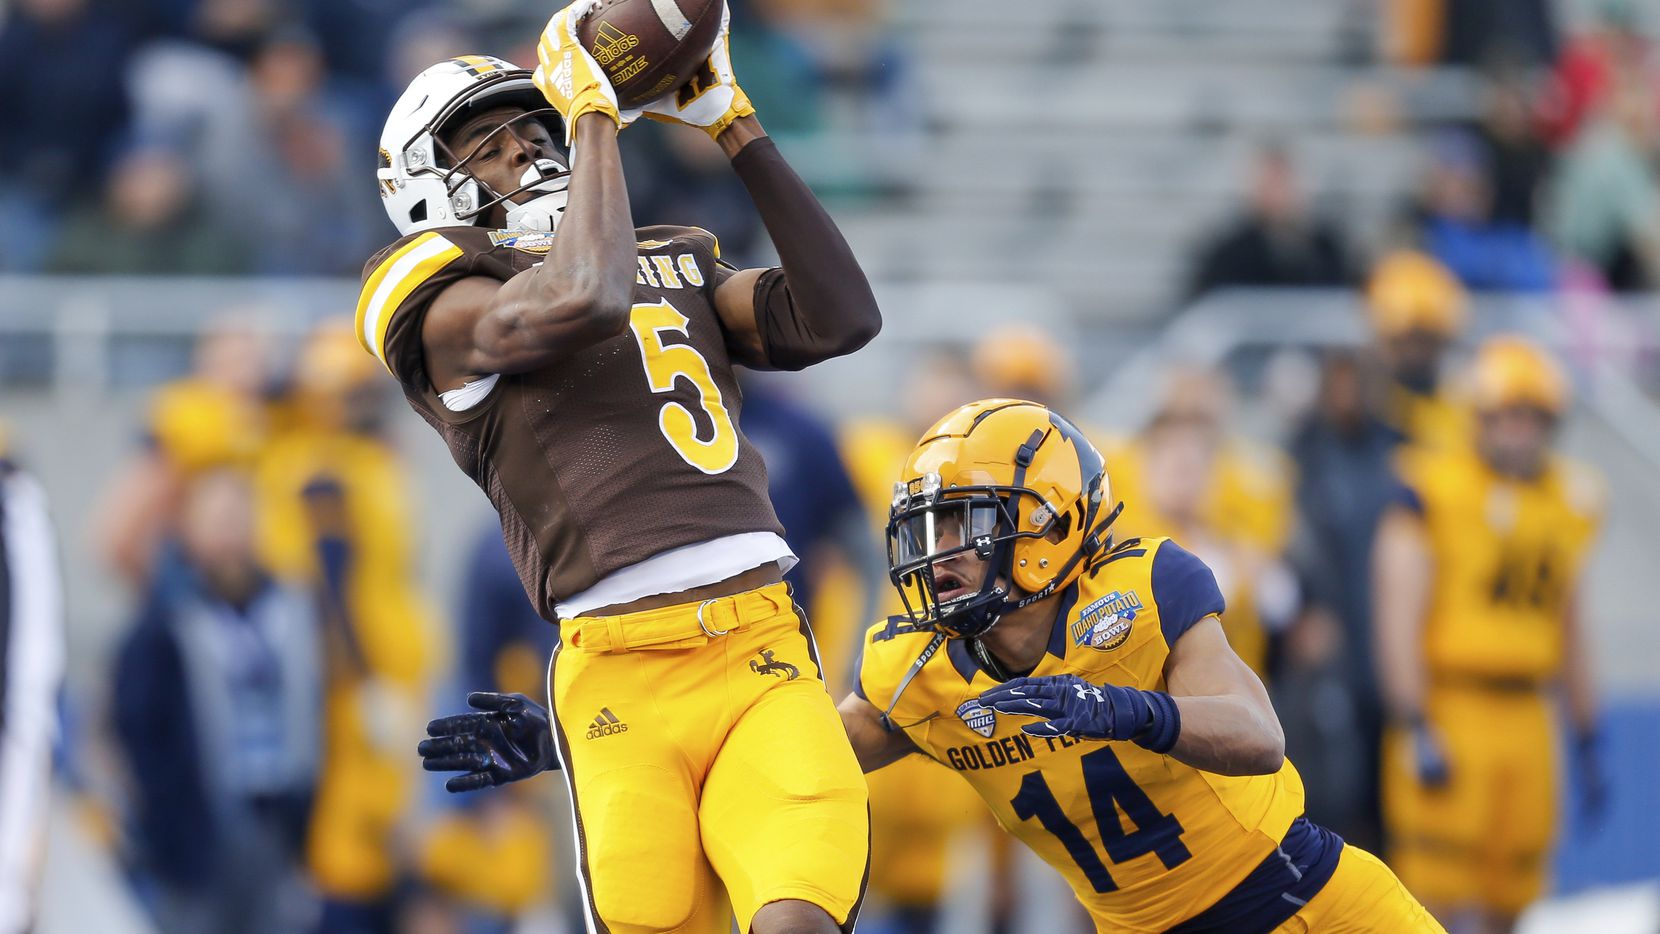 Wyoming wide receiver Isaiah Neyor (5) catches the ball in front of Kent State cornerback...